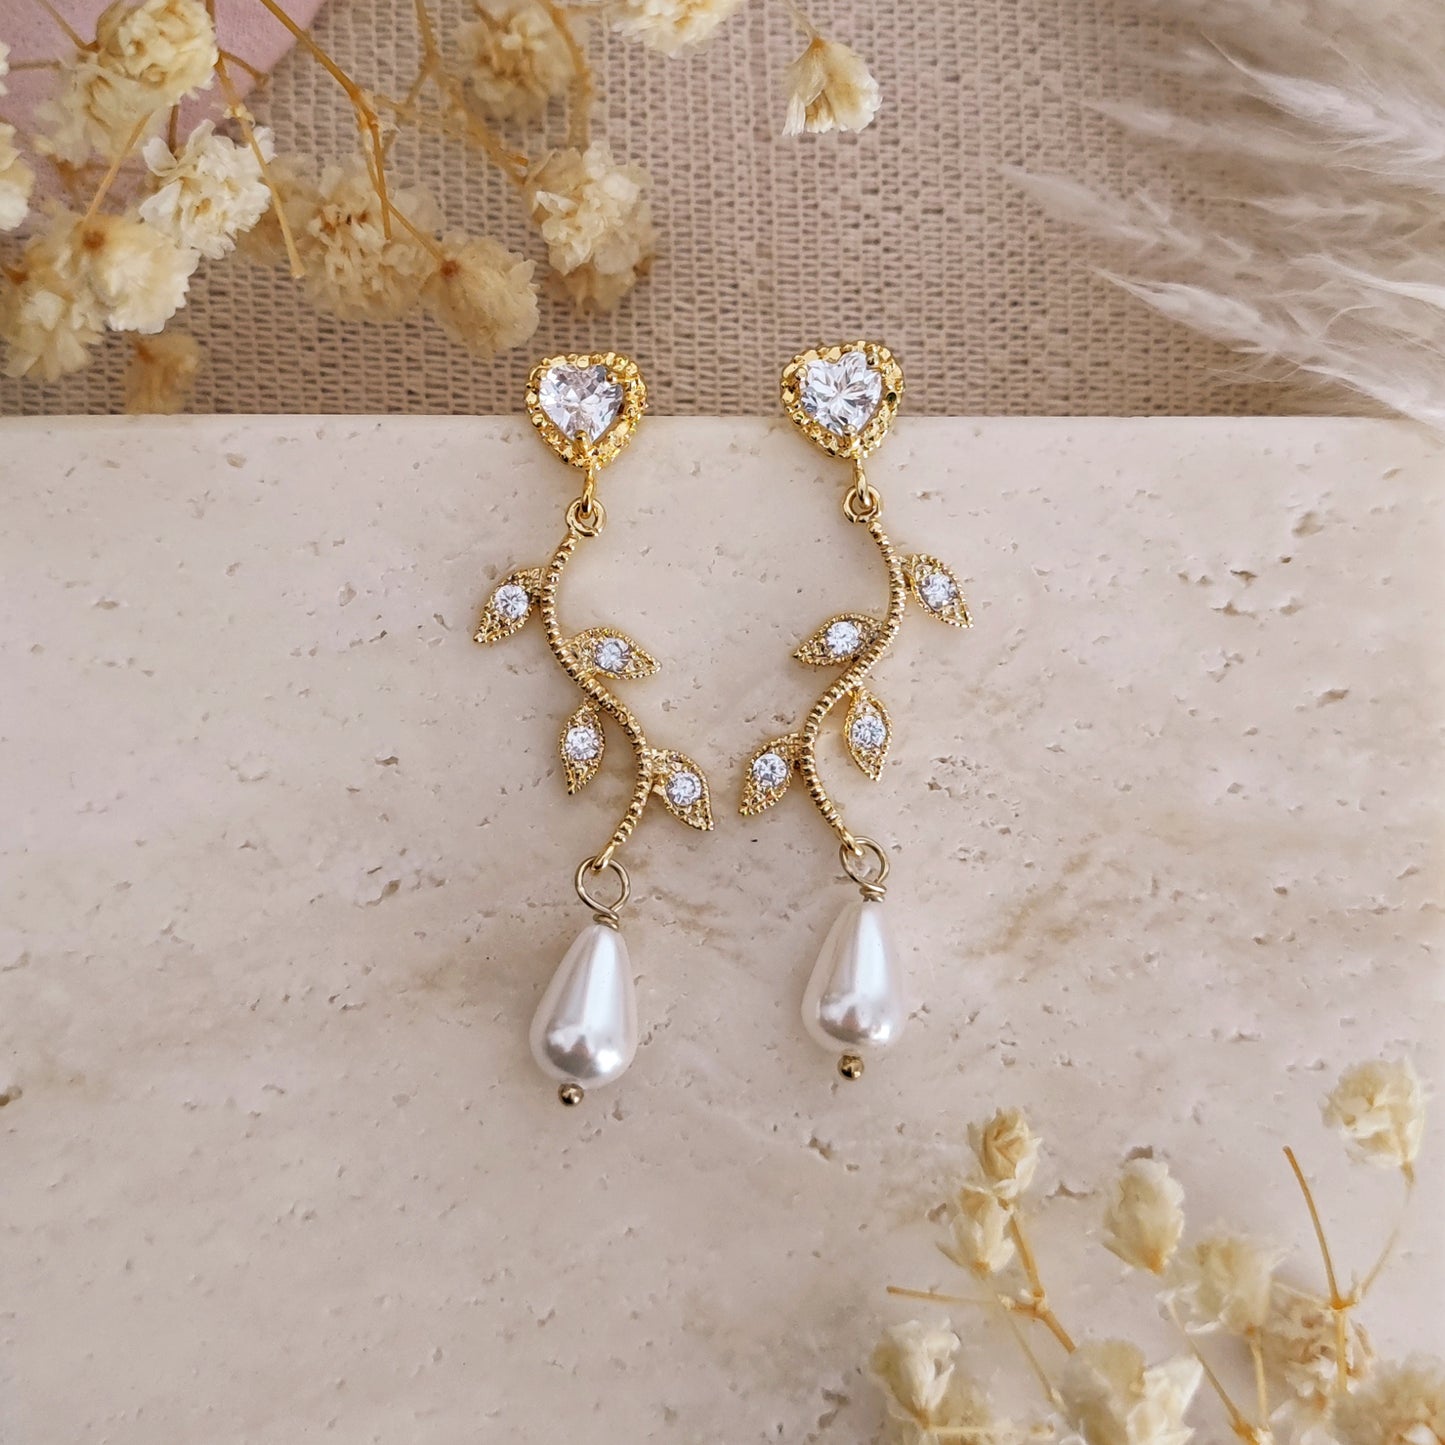 Heart Drop earrings with branches, crystals and drop pearls // MAURELLE